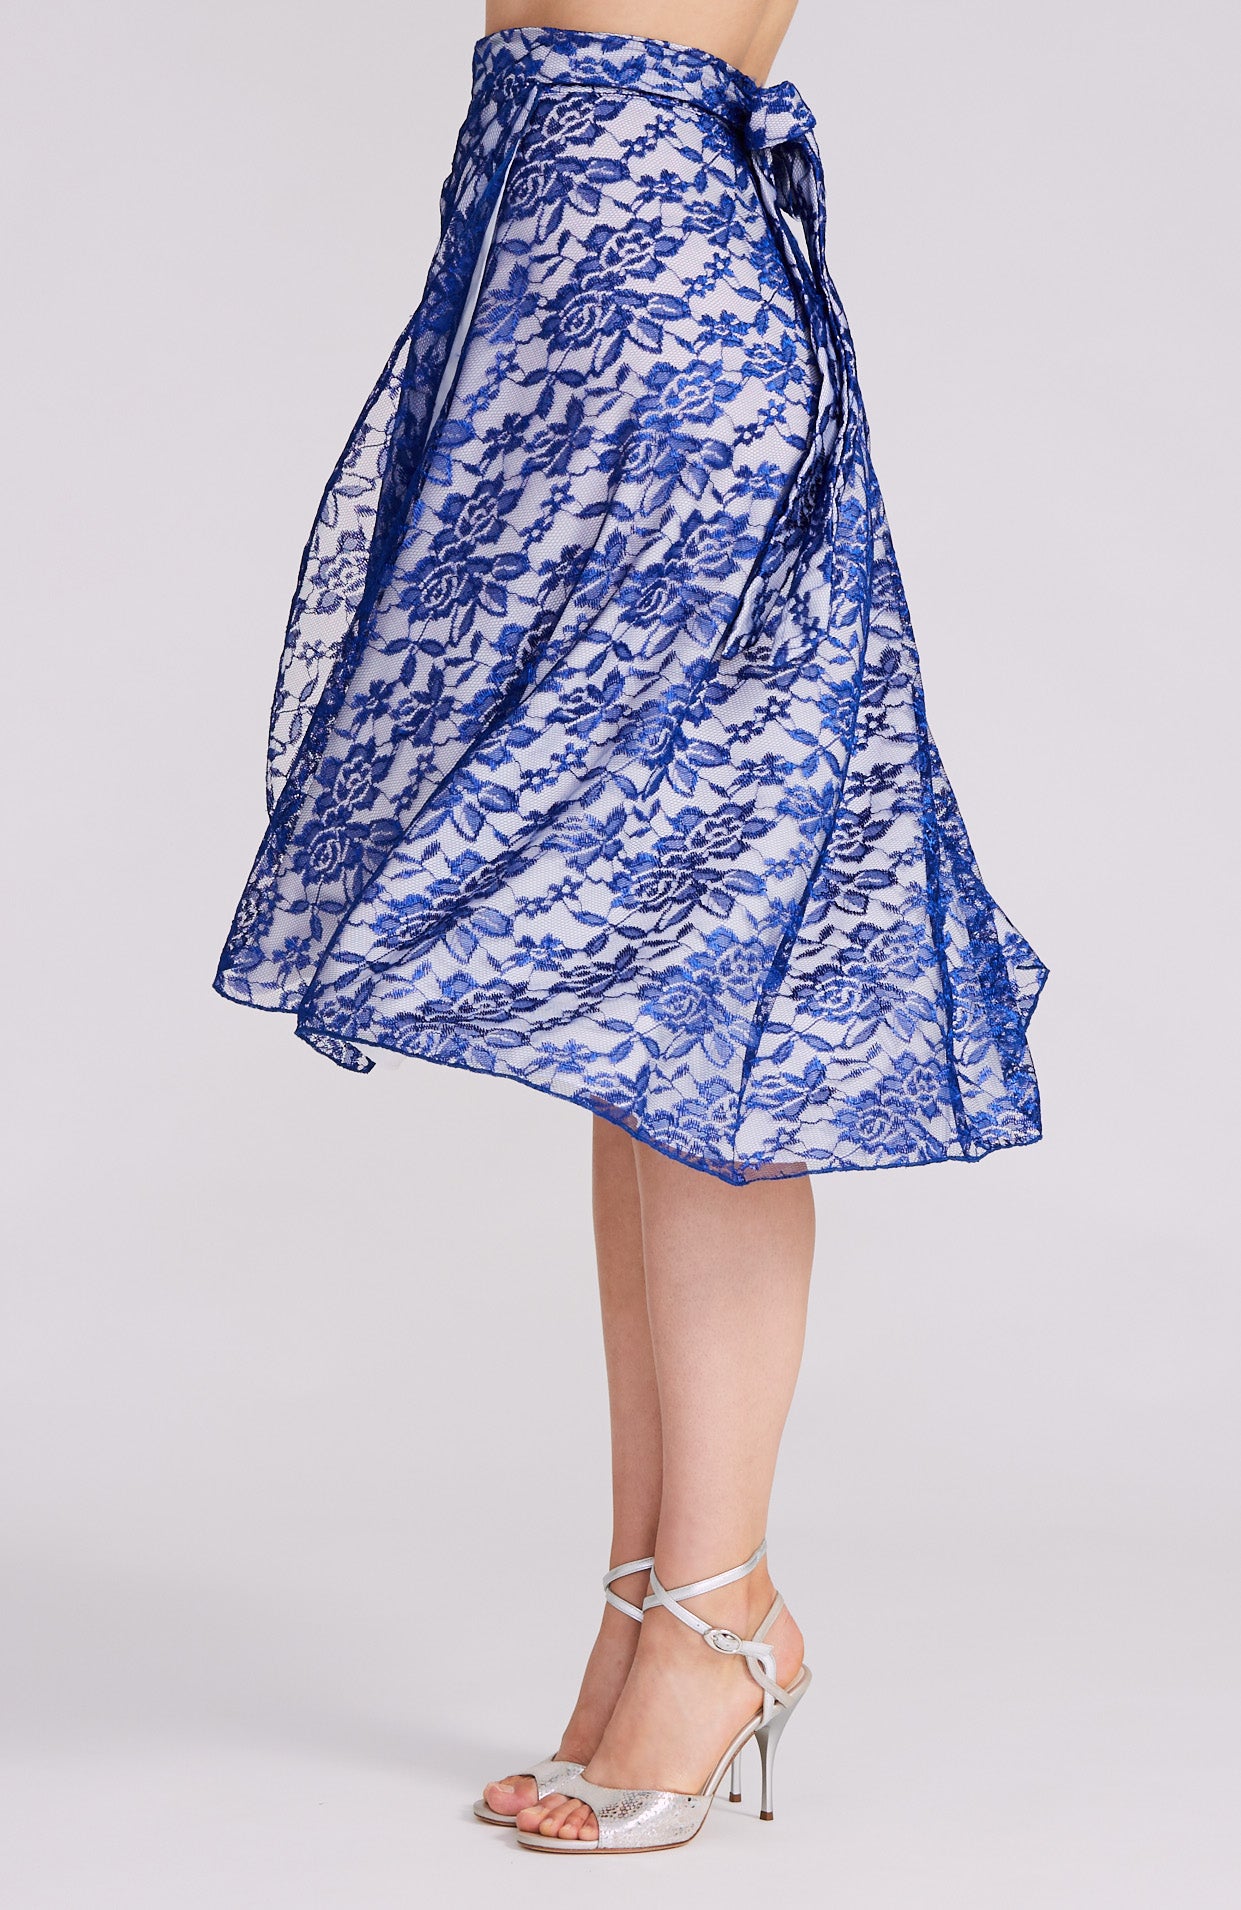 tango skirt in royal blue lace